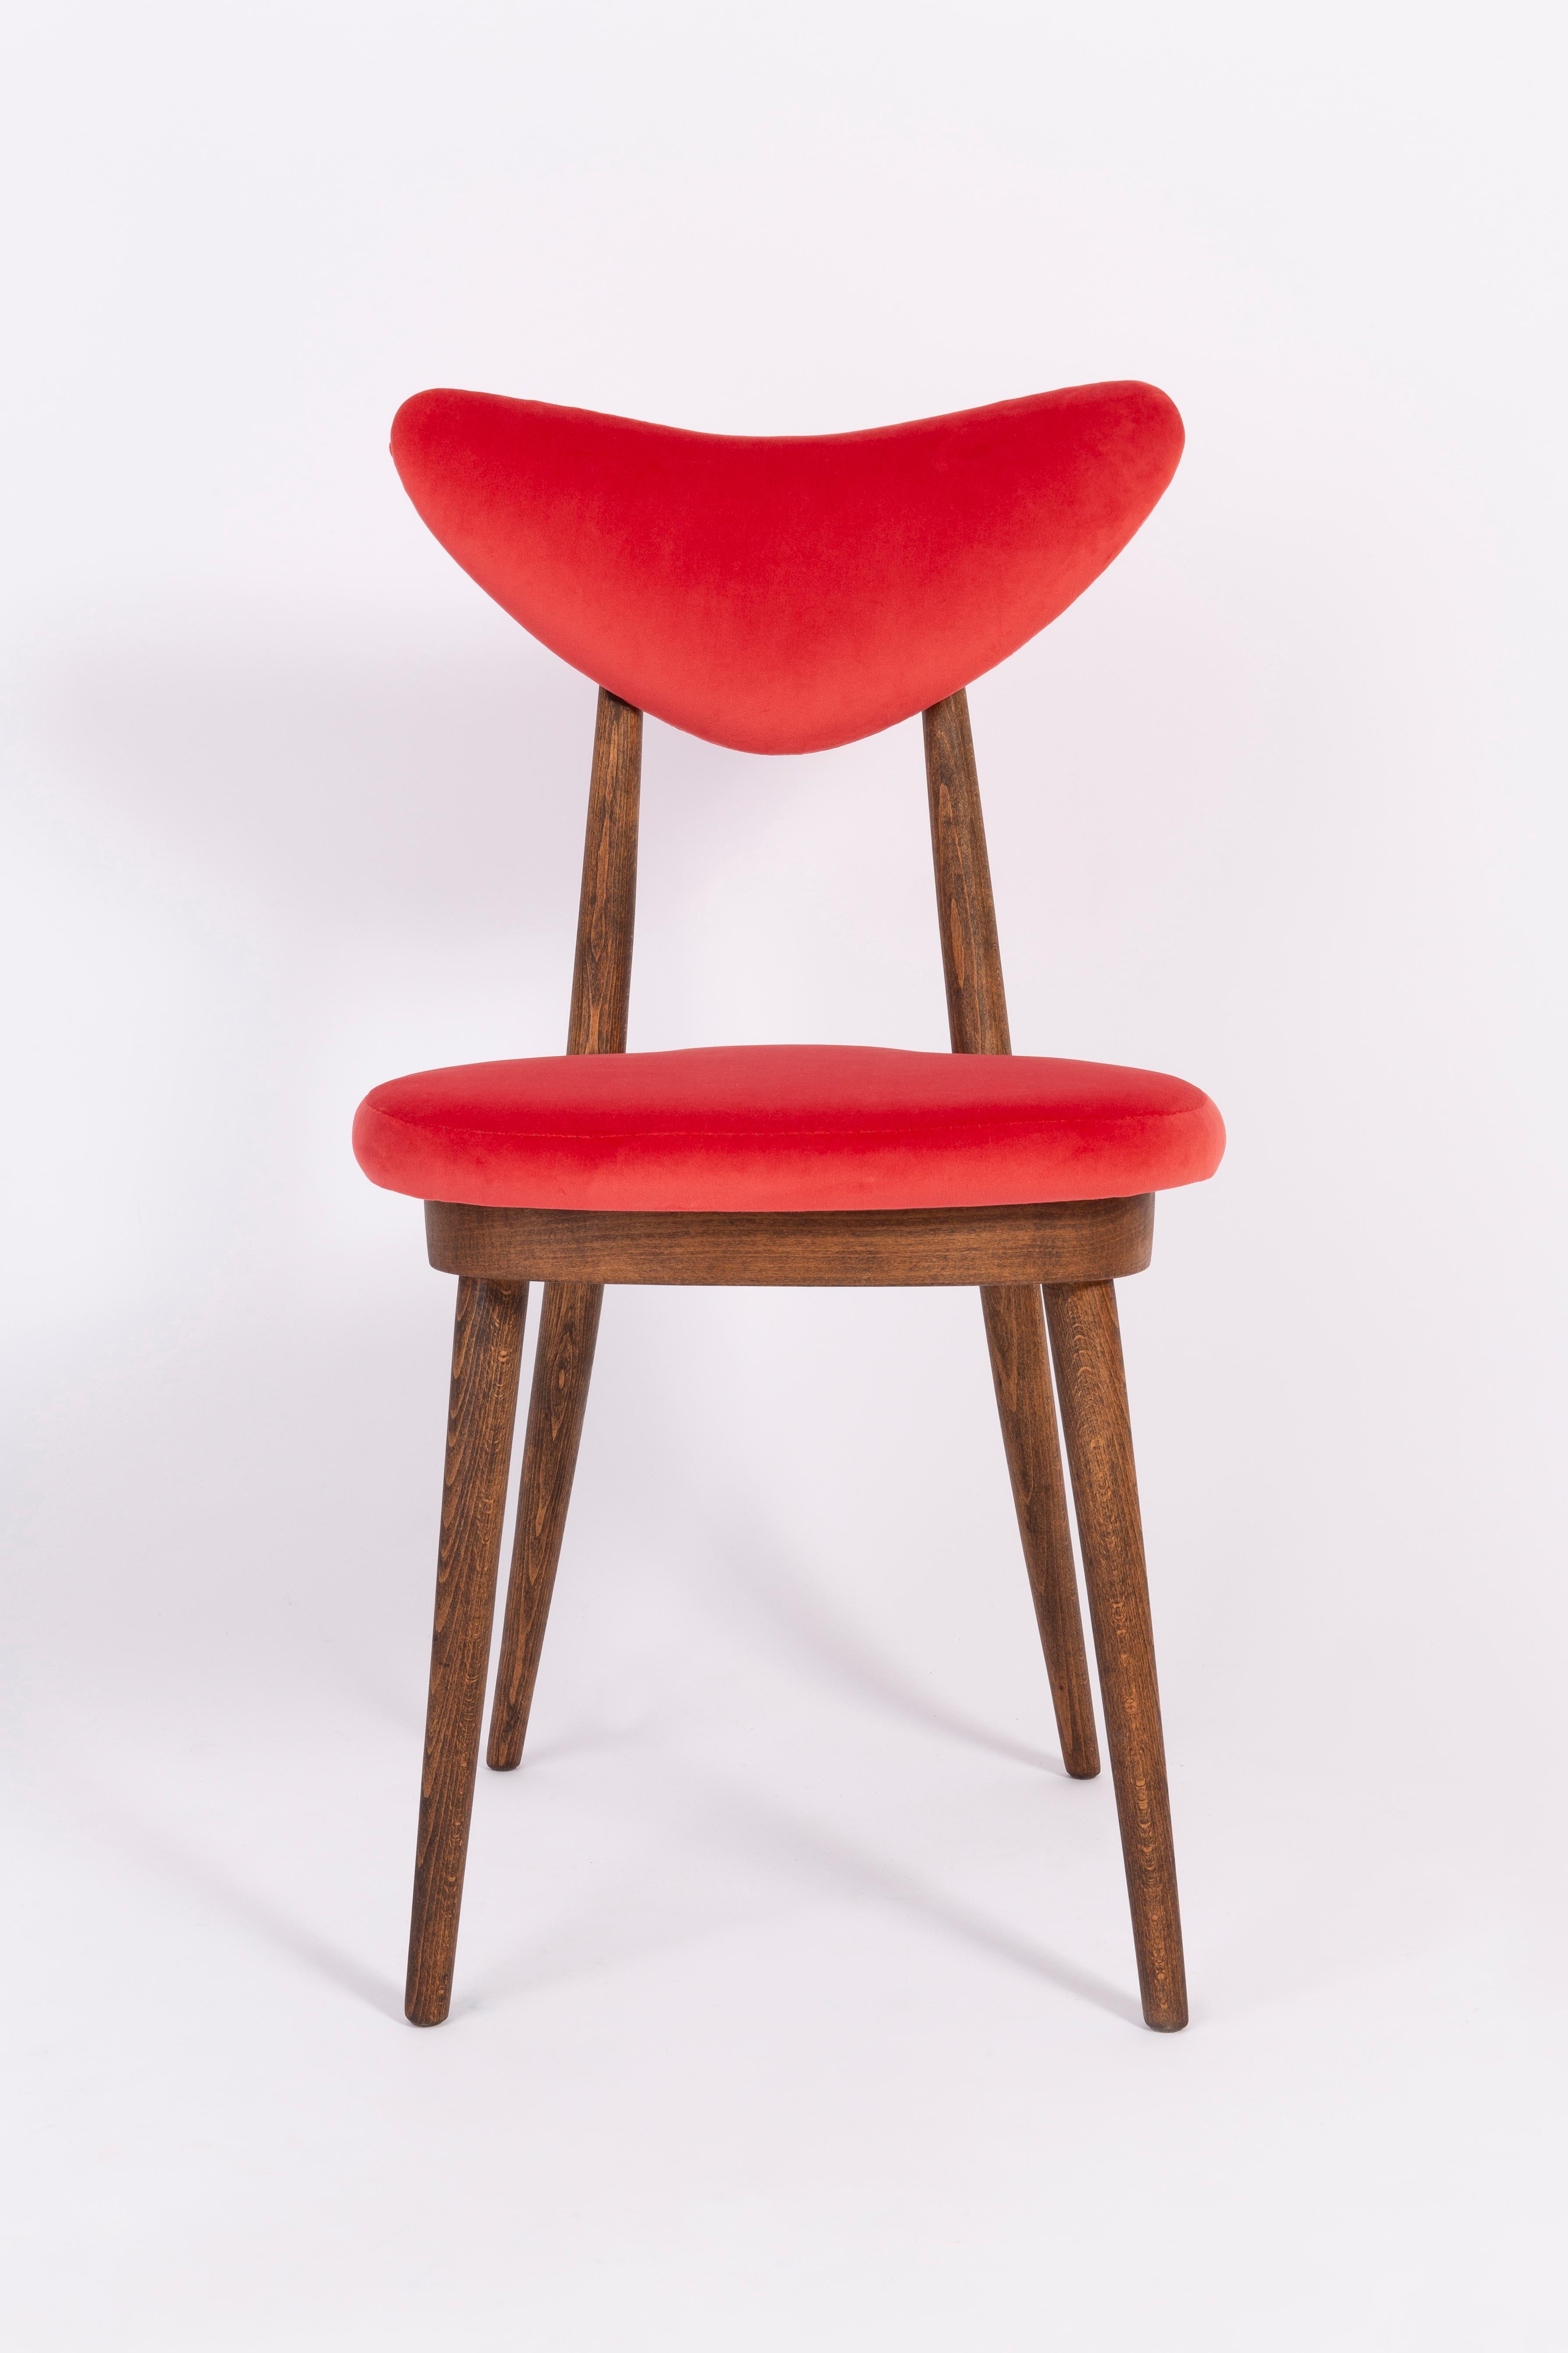 Pair of Red Heart Chairs, Poland, 1960s For Sale 6